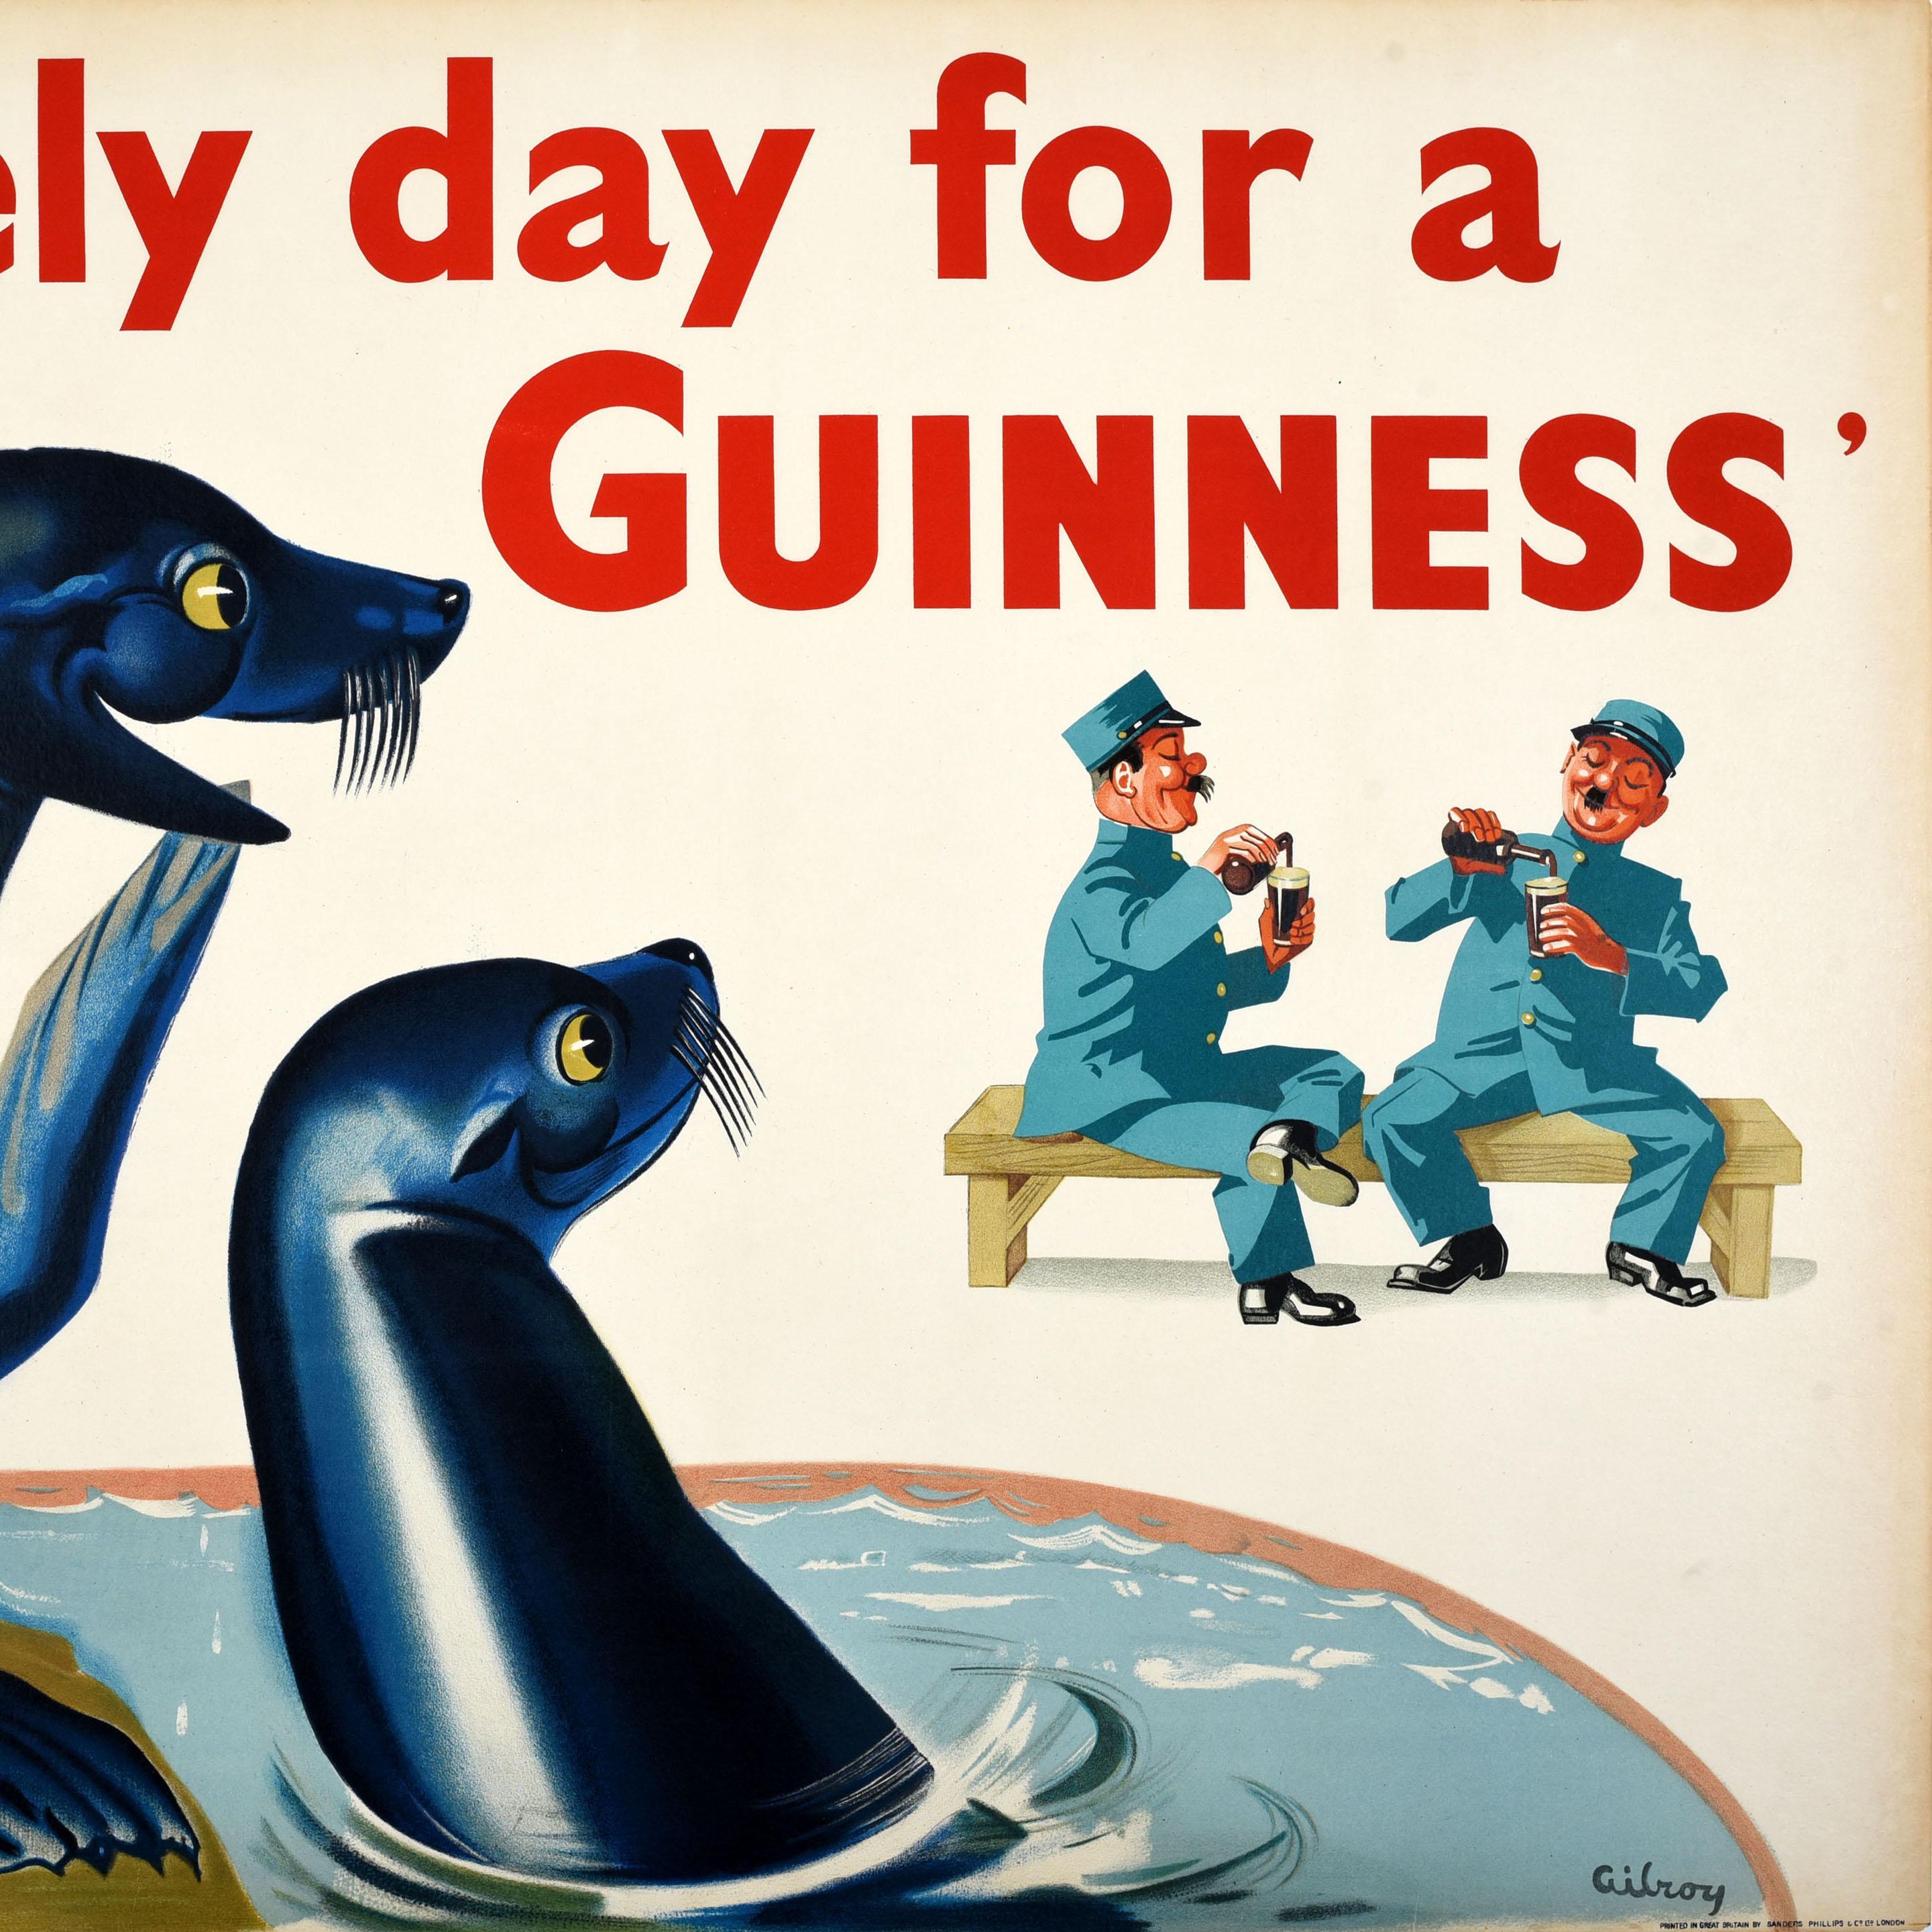 Original Vintage Advertising Poster Lovely Day For A Guinness Irish Stout Gilroy - Print by John Gilroy